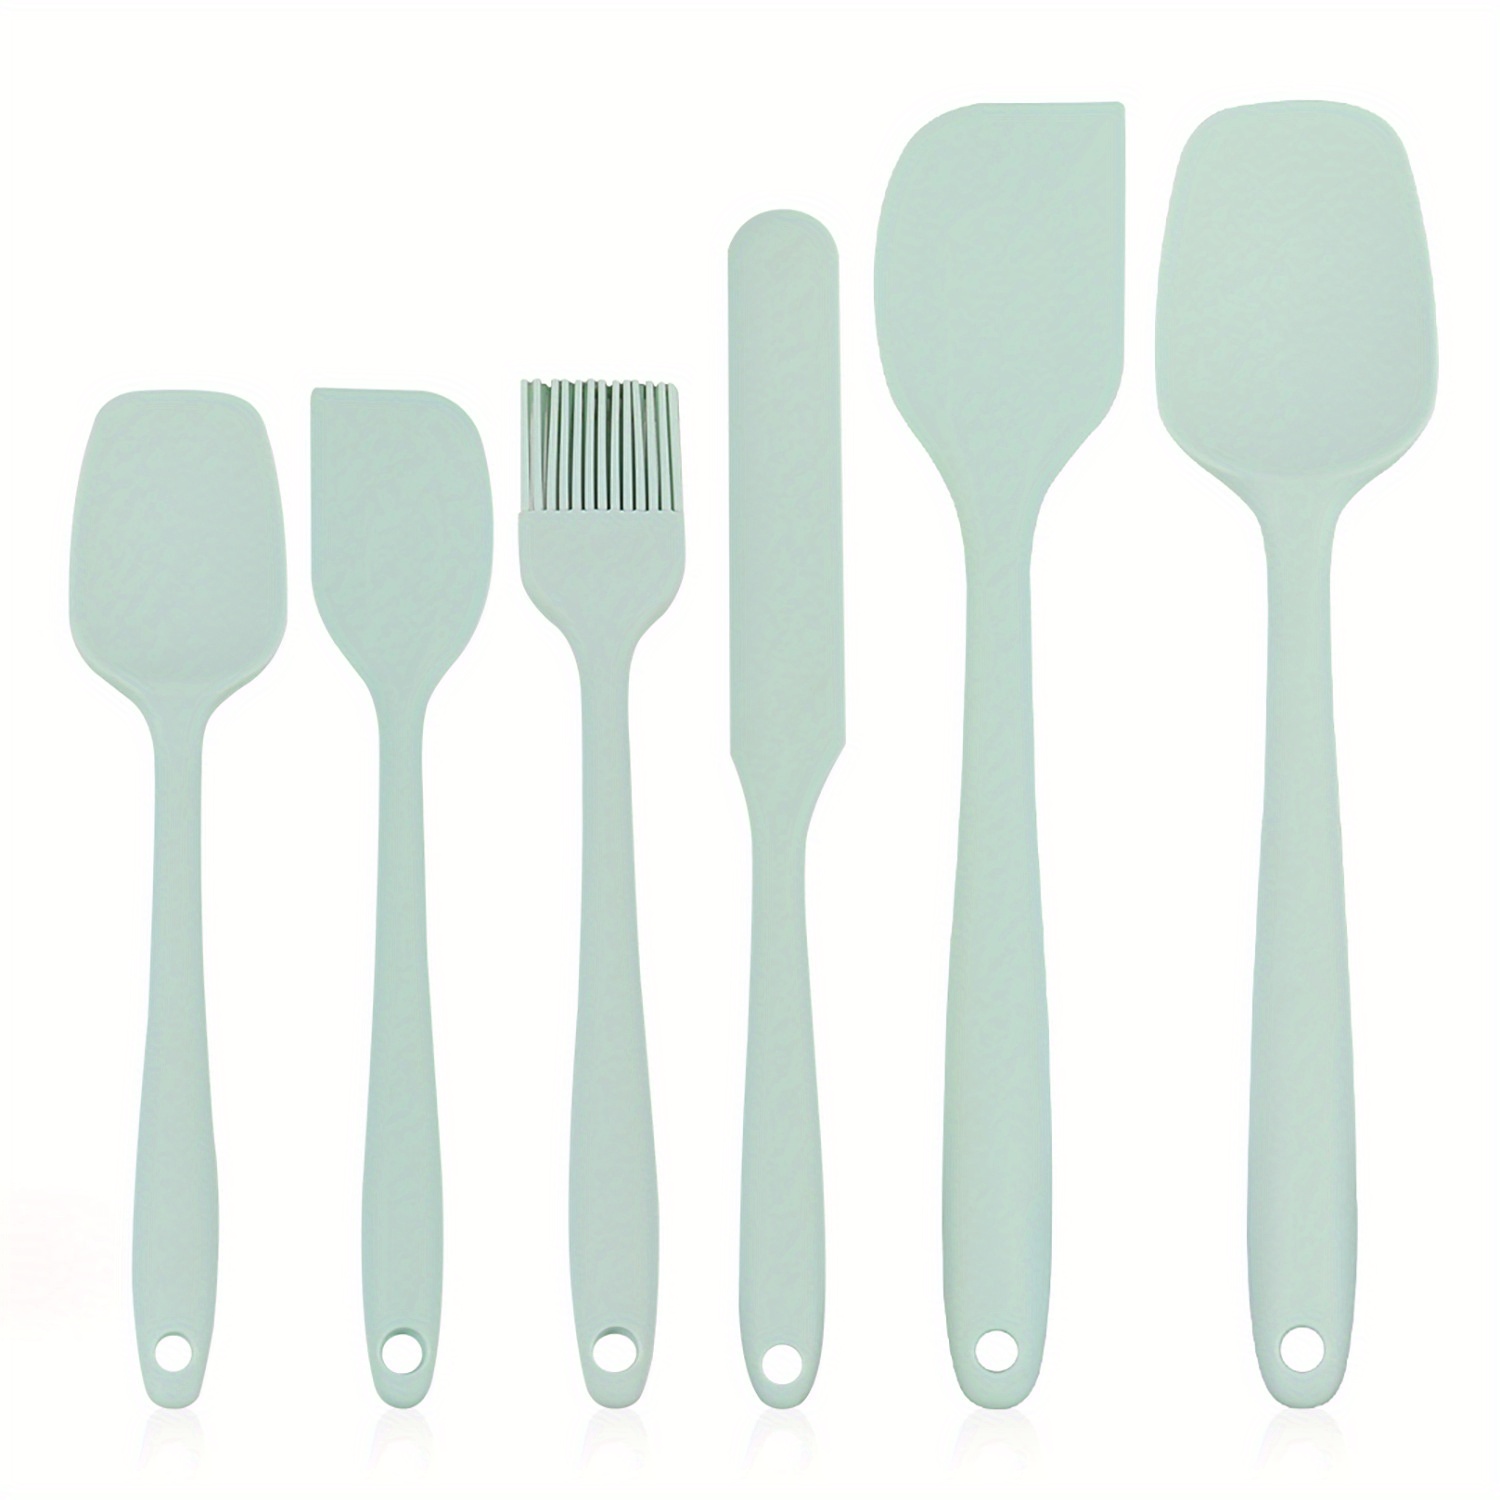 Dropship 6pcs Silicone Kitchenware Set; Kitchen Supplies; Baking Supplies;  Large Scraper; Spatula; Baking Tools; Cake Cream Spatula; Kitchen Tool Set  to Sell Online at a Lower Price